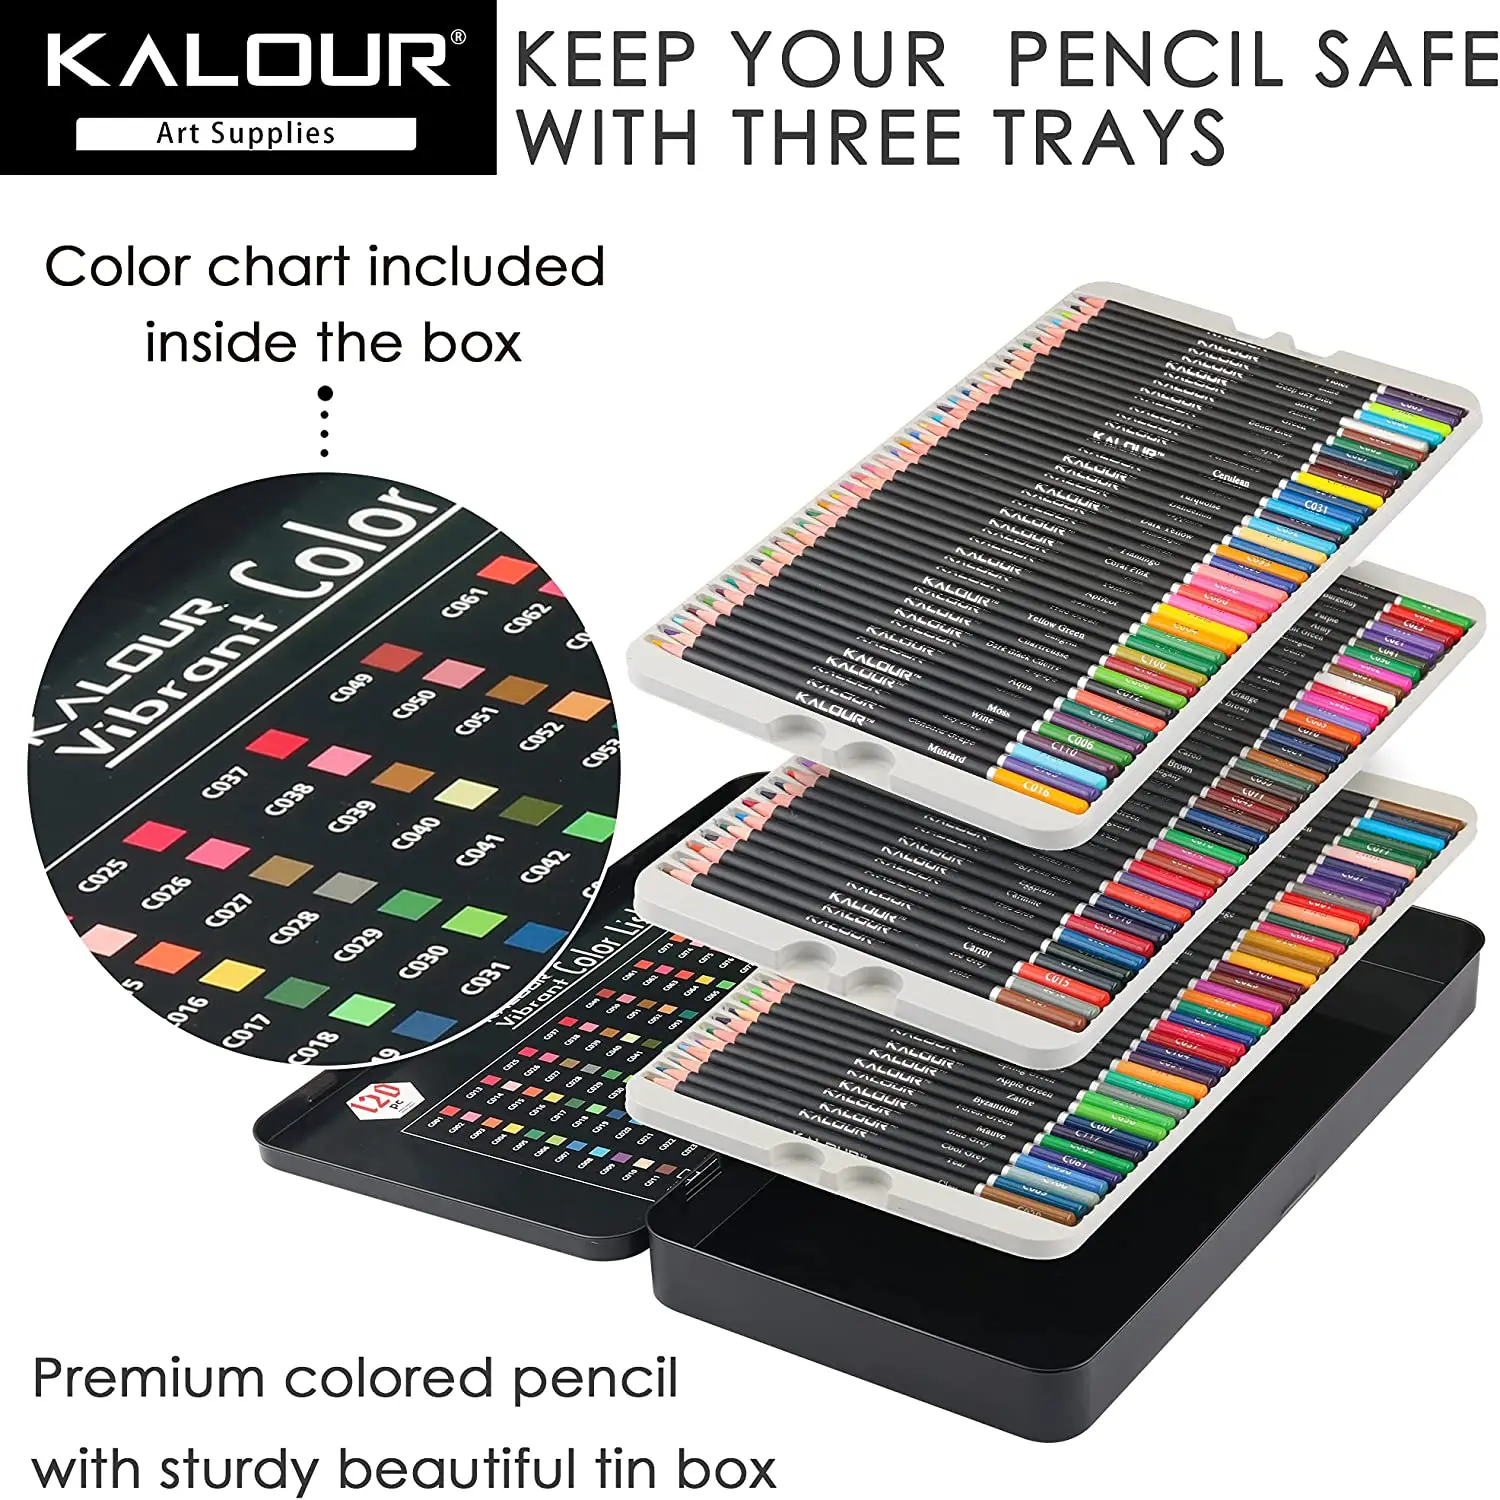 https://ae01.alicdn.com/kf/S04cd36d38f9243298c0e2501e3274ab4O/120-Premium-Colored-Pencils-Set-for-Adult-Coloring-Books-Soft-Core-Professional-Art-Drawing-Pencils-for.jpg